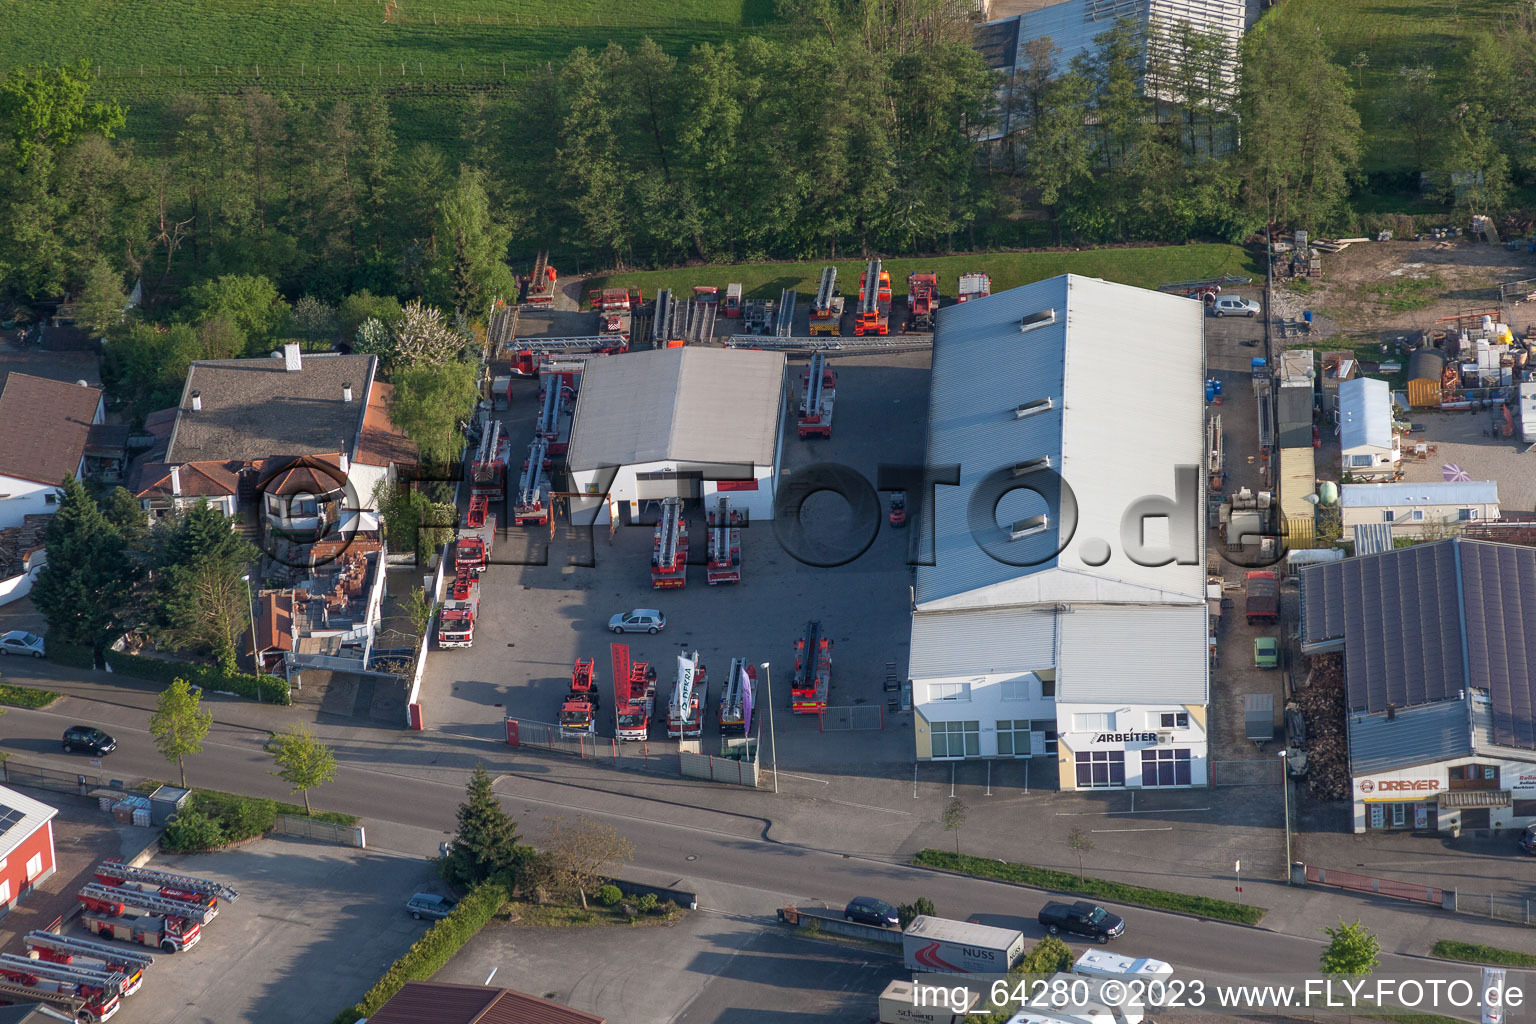 Minderlachen, Horst industrial area, Beitel turntable ladder workshop and Stier GmbH in the district Minderslachen in Kandel in the state Rhineland-Palatinate, Germany viewn from the air